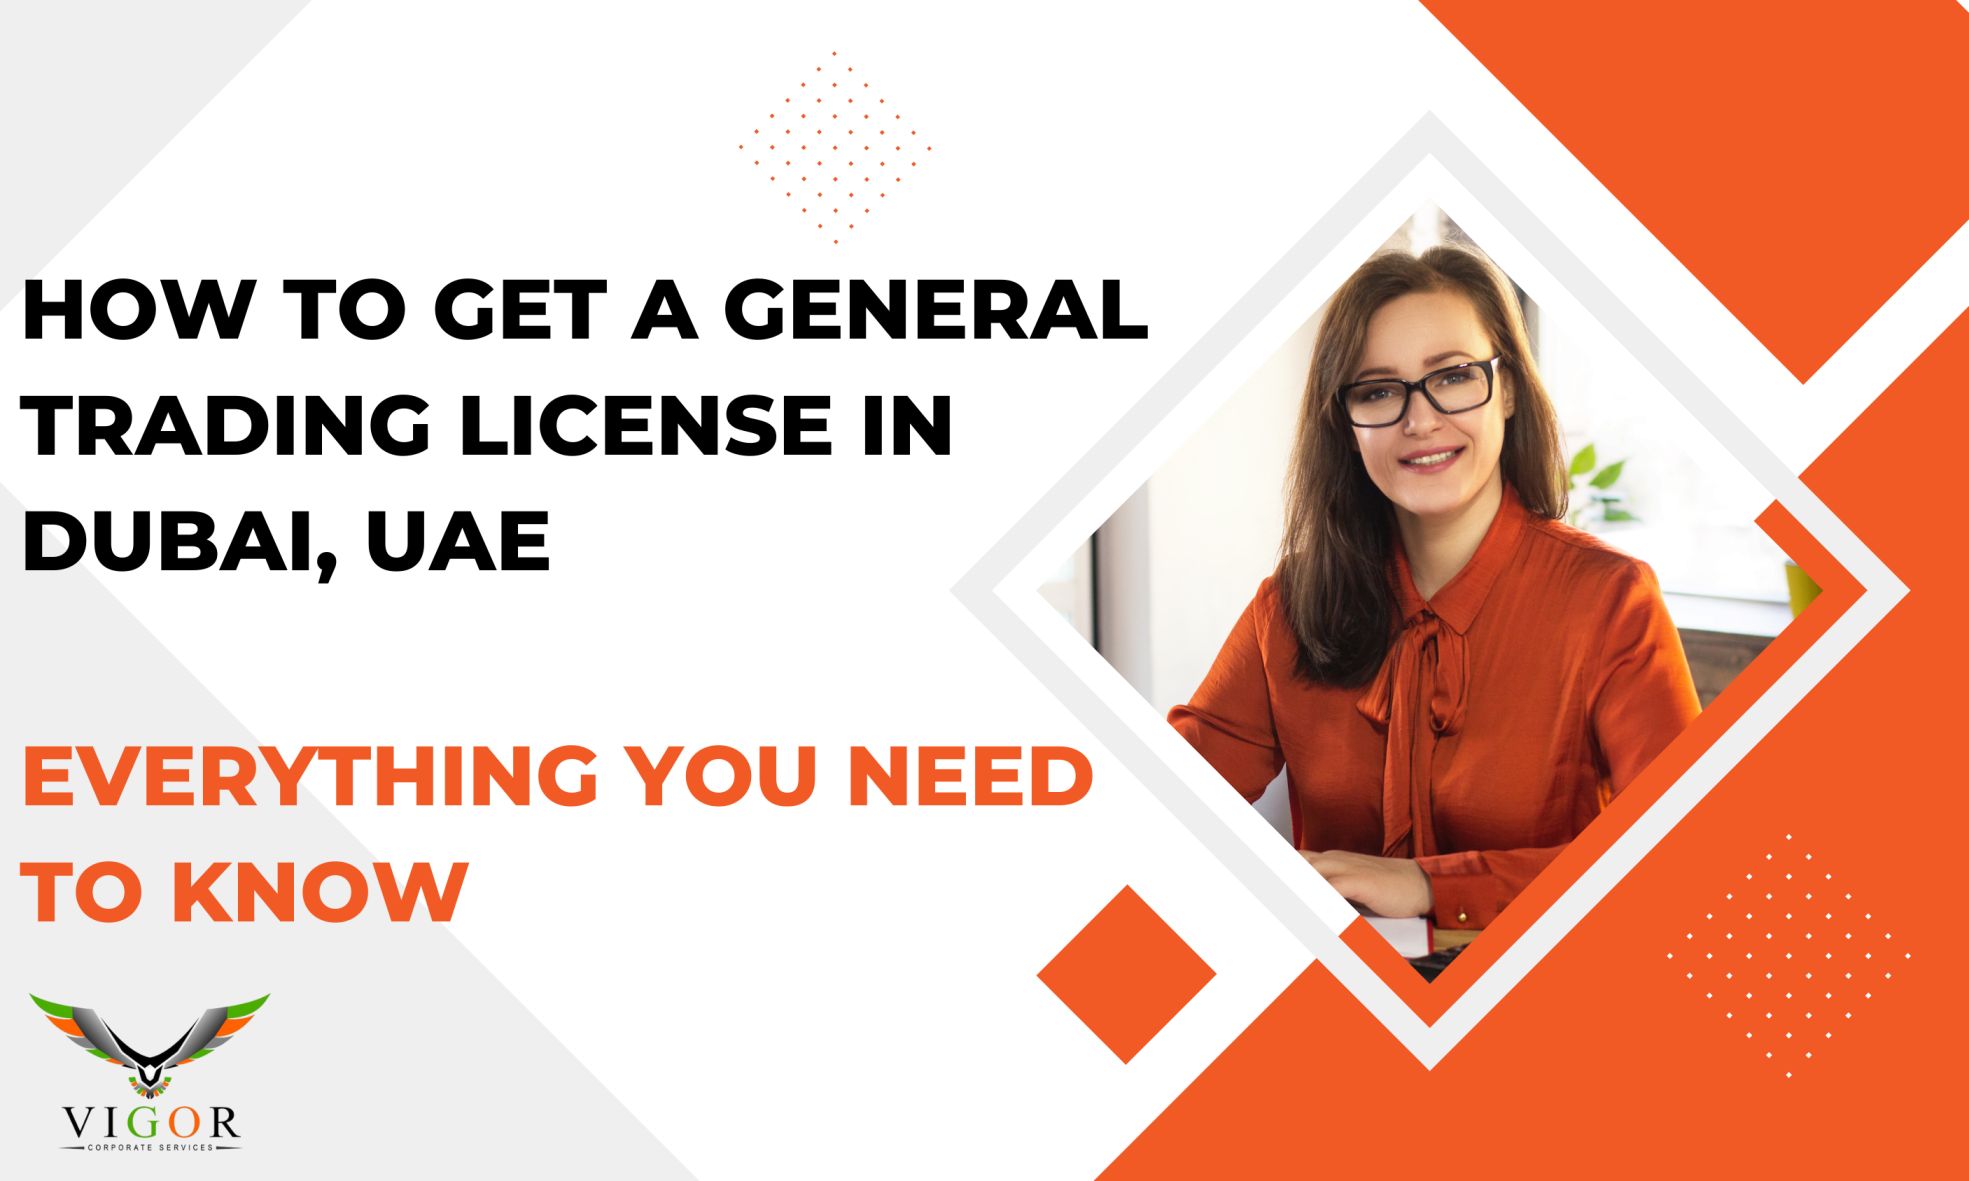 How to Get a General Trading License in Dubai, UAE: Everything You Need to Know